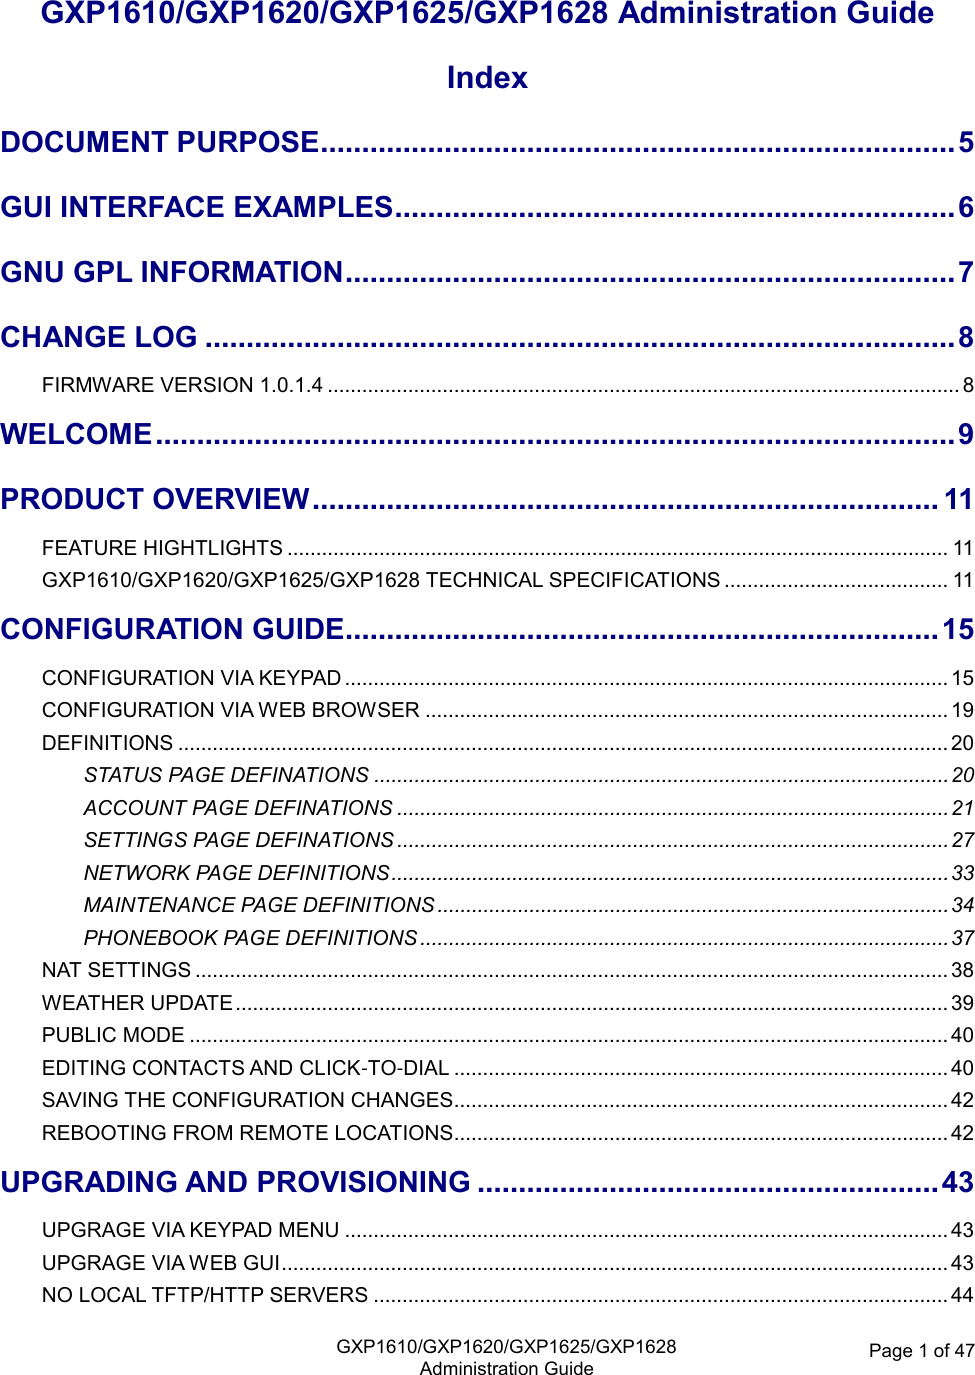   GXP1610/GXP1620/GXP1625/GXP1628Administration Guide Page 1 of 47  GXP1610/GXP1620/GXP1625/GXP1628 Administration Guide Index DOCUMENT PURPOSE ............................................................................. 5 GUI INTERFACE EXAMPLES .................................................................... 6 GNU GPL INFORMATION .......................................................................... 7 CHANGE LOG ........................................................................................... 8 FIRMWARE VERSION 1.0.1.4 .............................................................................................................. 8 WELCOME ................................................................................................. 9 PRODUCT OVERVIEW ............................................................................ 11 FEATURE HIGHTLIGHTS ................................................................................................................... 11 GXP1610/GXP1620/GXP1625/GXP1628 TECHNICAL SPECIFICATIONS ....................................... 11 CONFIGURATION GUIDE ........................................................................ 15 CONFIGURATION VIA KEYPAD ......................................................................................................... 15 CONFIGURATION VIA WEB BROWSER ........................................................................................... 19 DEFINITIONS ...................................................................................................................................... 20 STATUS PAGE DEFINATIONS .................................................................................................... 20 ACCOUNT PAGE DEFINATIONS ................................................................................................ 21 SETTINGS PAGE DEFINATIONS ................................................................................................ 27 NETWORK PAGE DEFINITIONS ................................................................................................. 33 MAINTENANCE PAGE DEFINITIONS ......................................................................................... 34 PHONEBOOK PAGE DEFINITIONS ............................................................................................ 37 NAT SETTINGS ................................................................................................................................... 38 WEATHER UPDATE ............................................................................................................................ 39 PUBLIC MODE .................................................................................................................................... 40 EDITING CONTACTS AND CLICK-TO-DIAL ...................................................................................... 40 SAVING THE CONFIGURATION CHANGES...................................................................................... 42 REBOOTING FROM REMOTE LOCATIONS ...................................................................................... 42 UPGRADING AND PROVISIONING ........................................................ 43 UPGRAGE VIA KEYPAD MENU ......................................................................................................... 43 UPGRAGE VIA WEB GUI .................................................................................................................... 43 NO LOCAL TFTP/HTTP SERVERS .................................................................................................... 44 